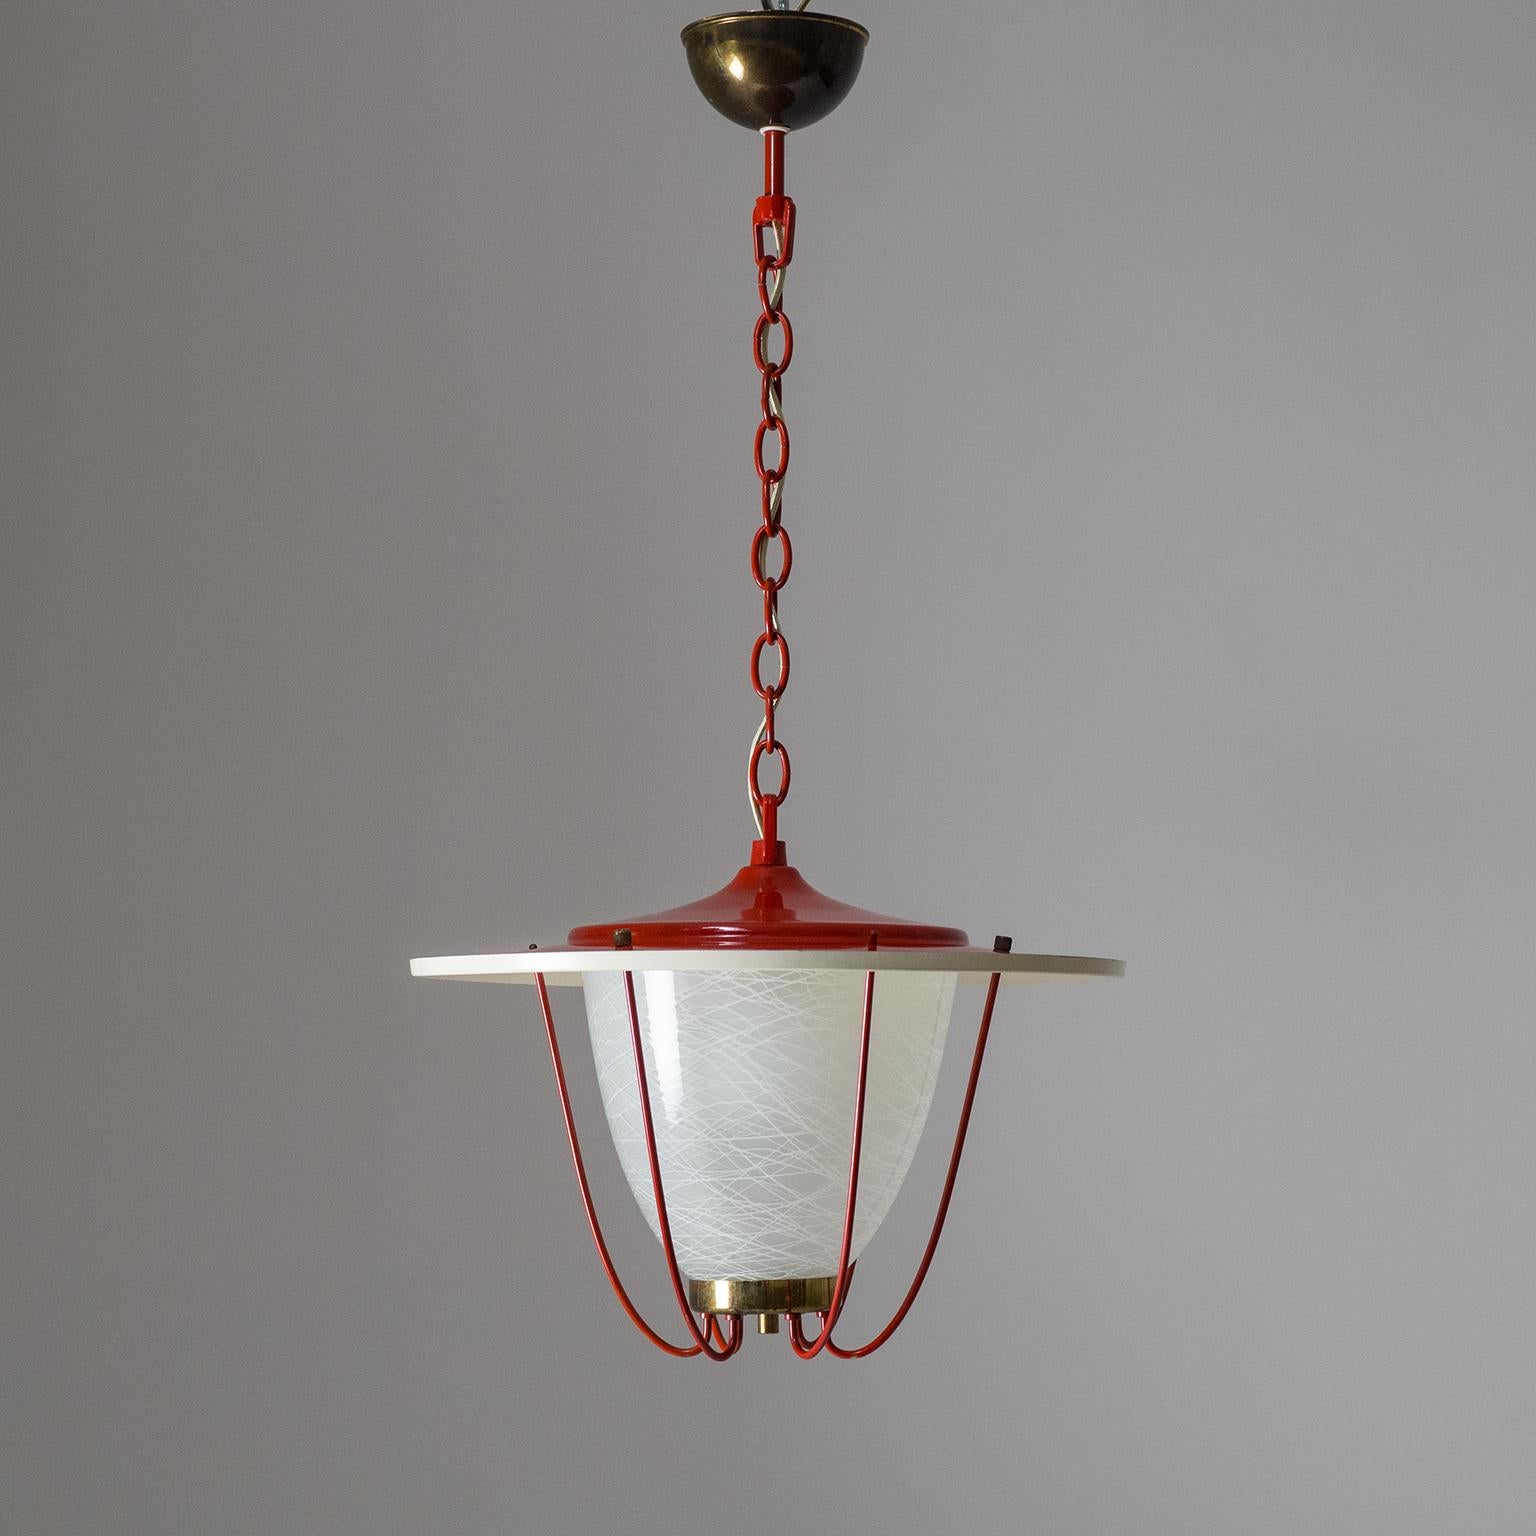 Delightful colorful midcentury lantern from the 1950s. The large shade is lacquered off-white on the inside and glossy red on the outside, the chain and the brass shade supports are lacquered in the same red, all in fine original condition save for